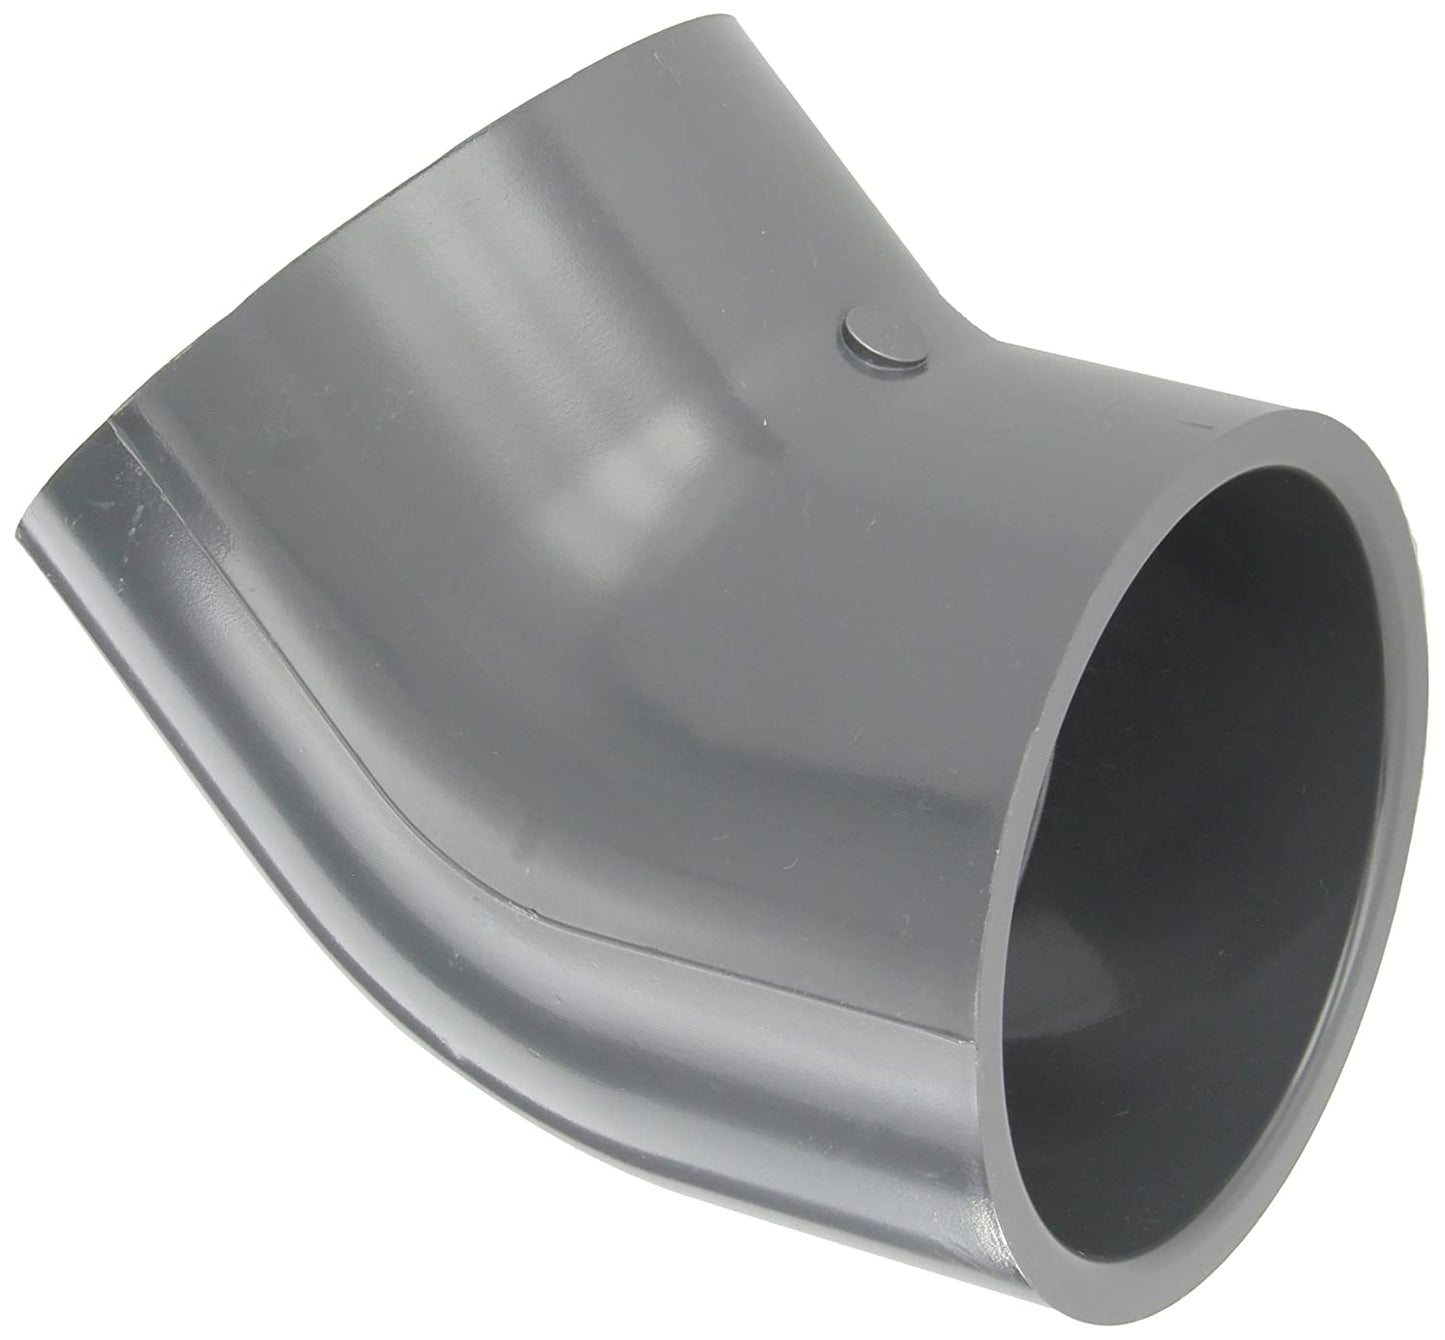 817-040 - PVC Pipe Fitting, 45 Degree Elbow, Schedule 80, 4" Socket